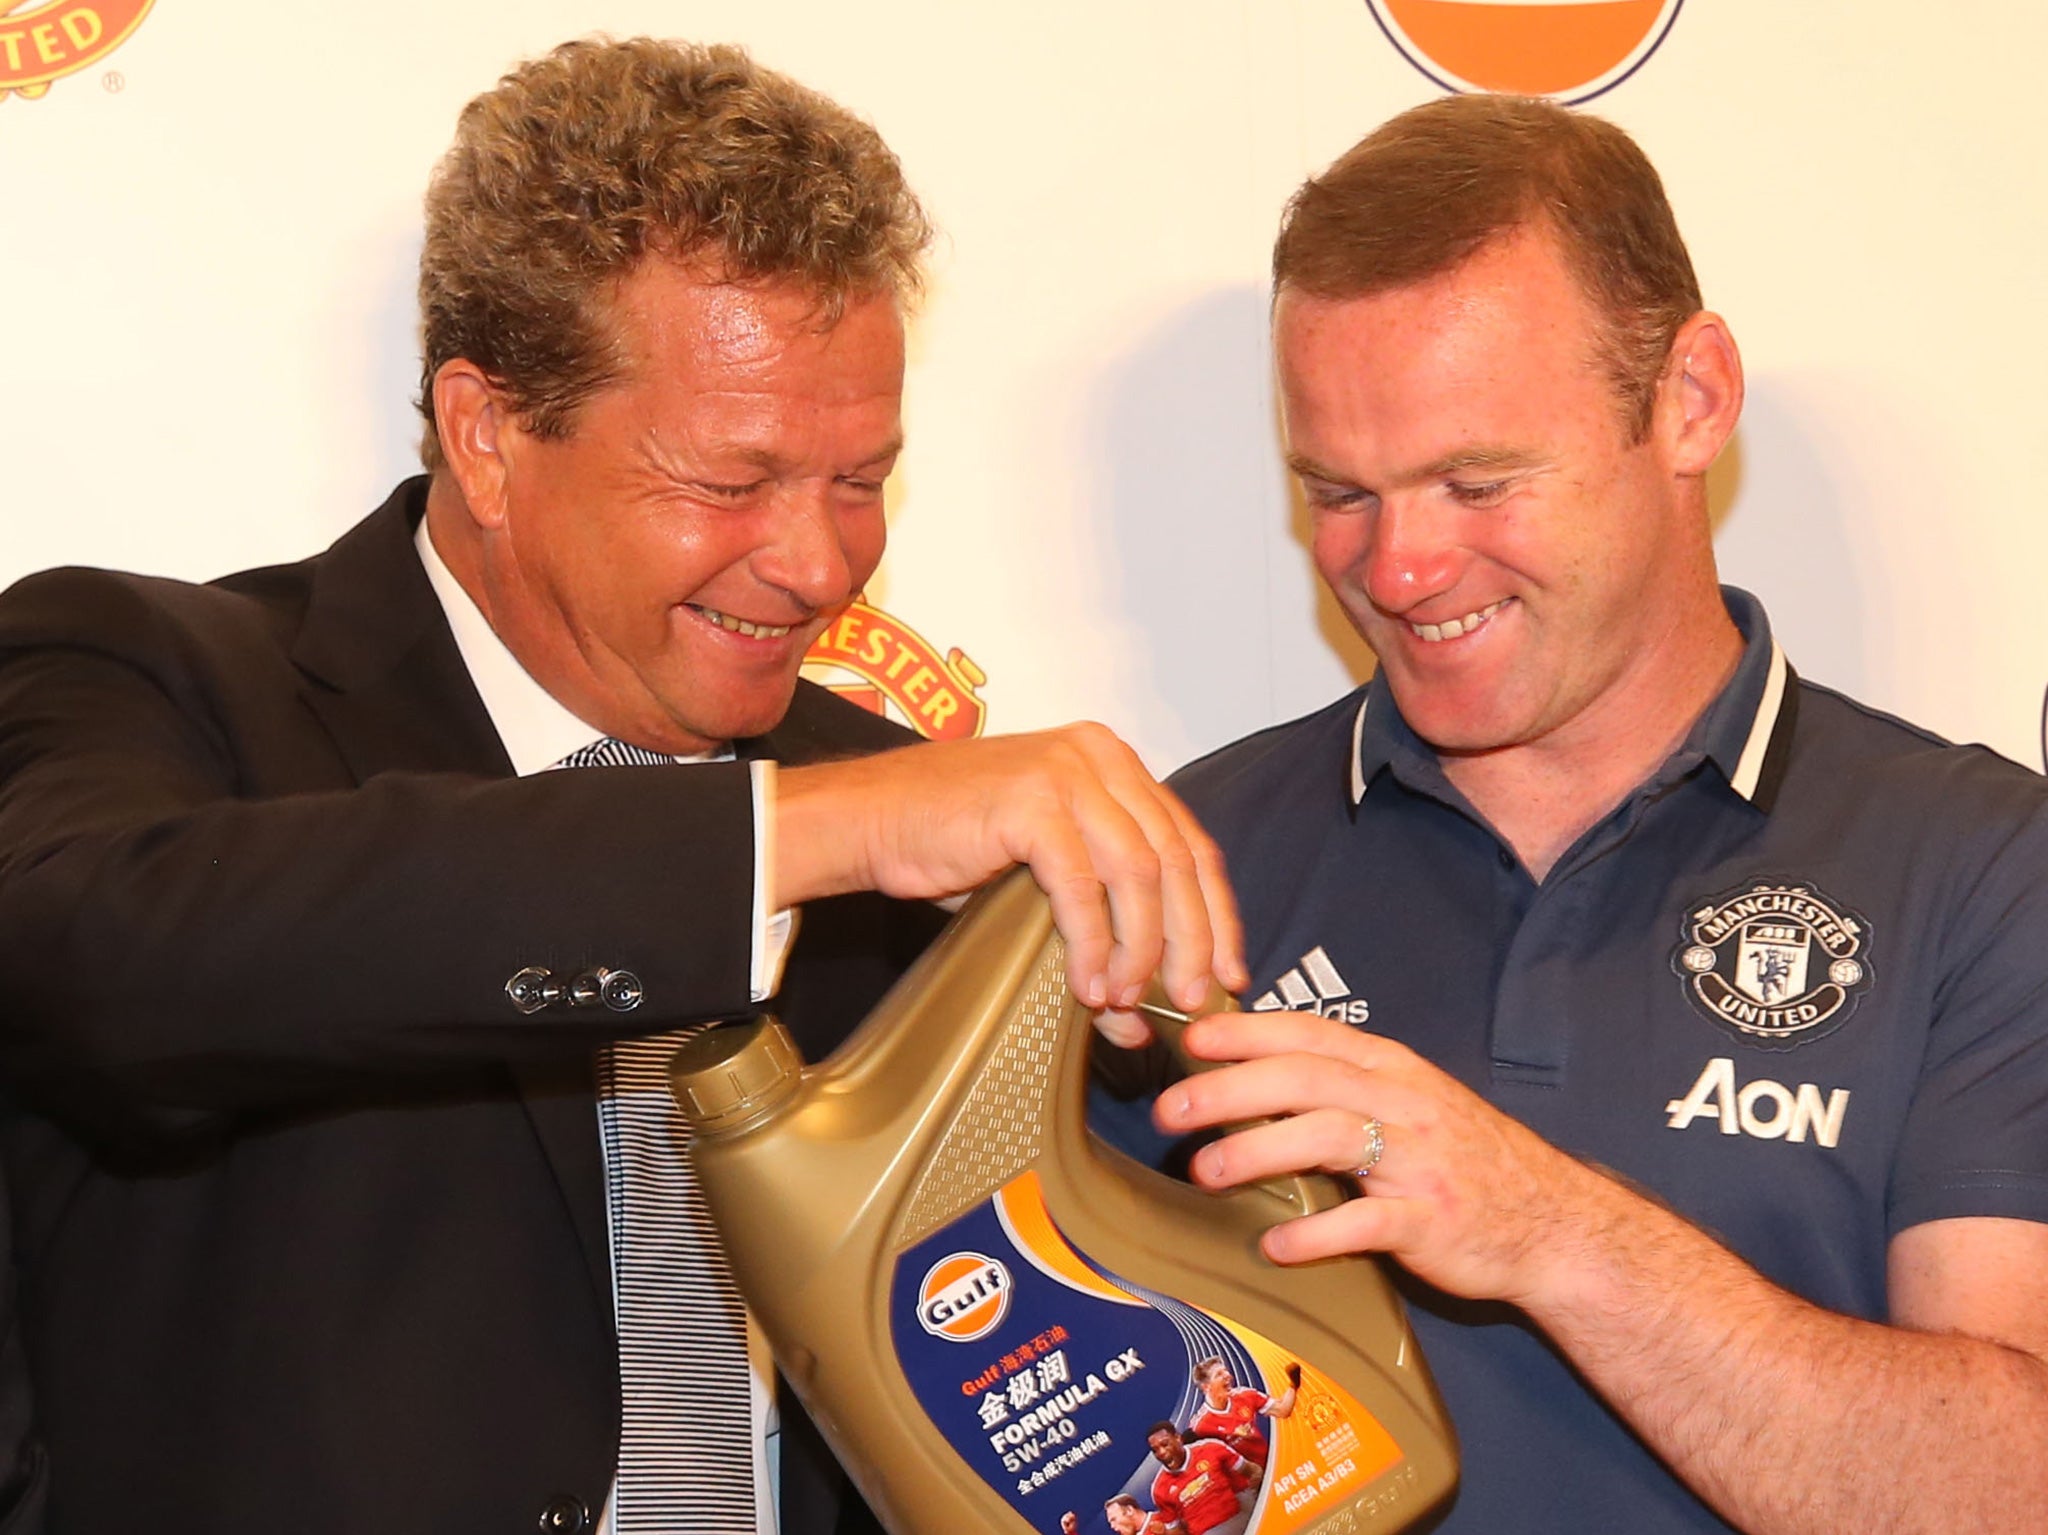 Rutten, vice-president of Gulf Oil, introduces Rooney to his product